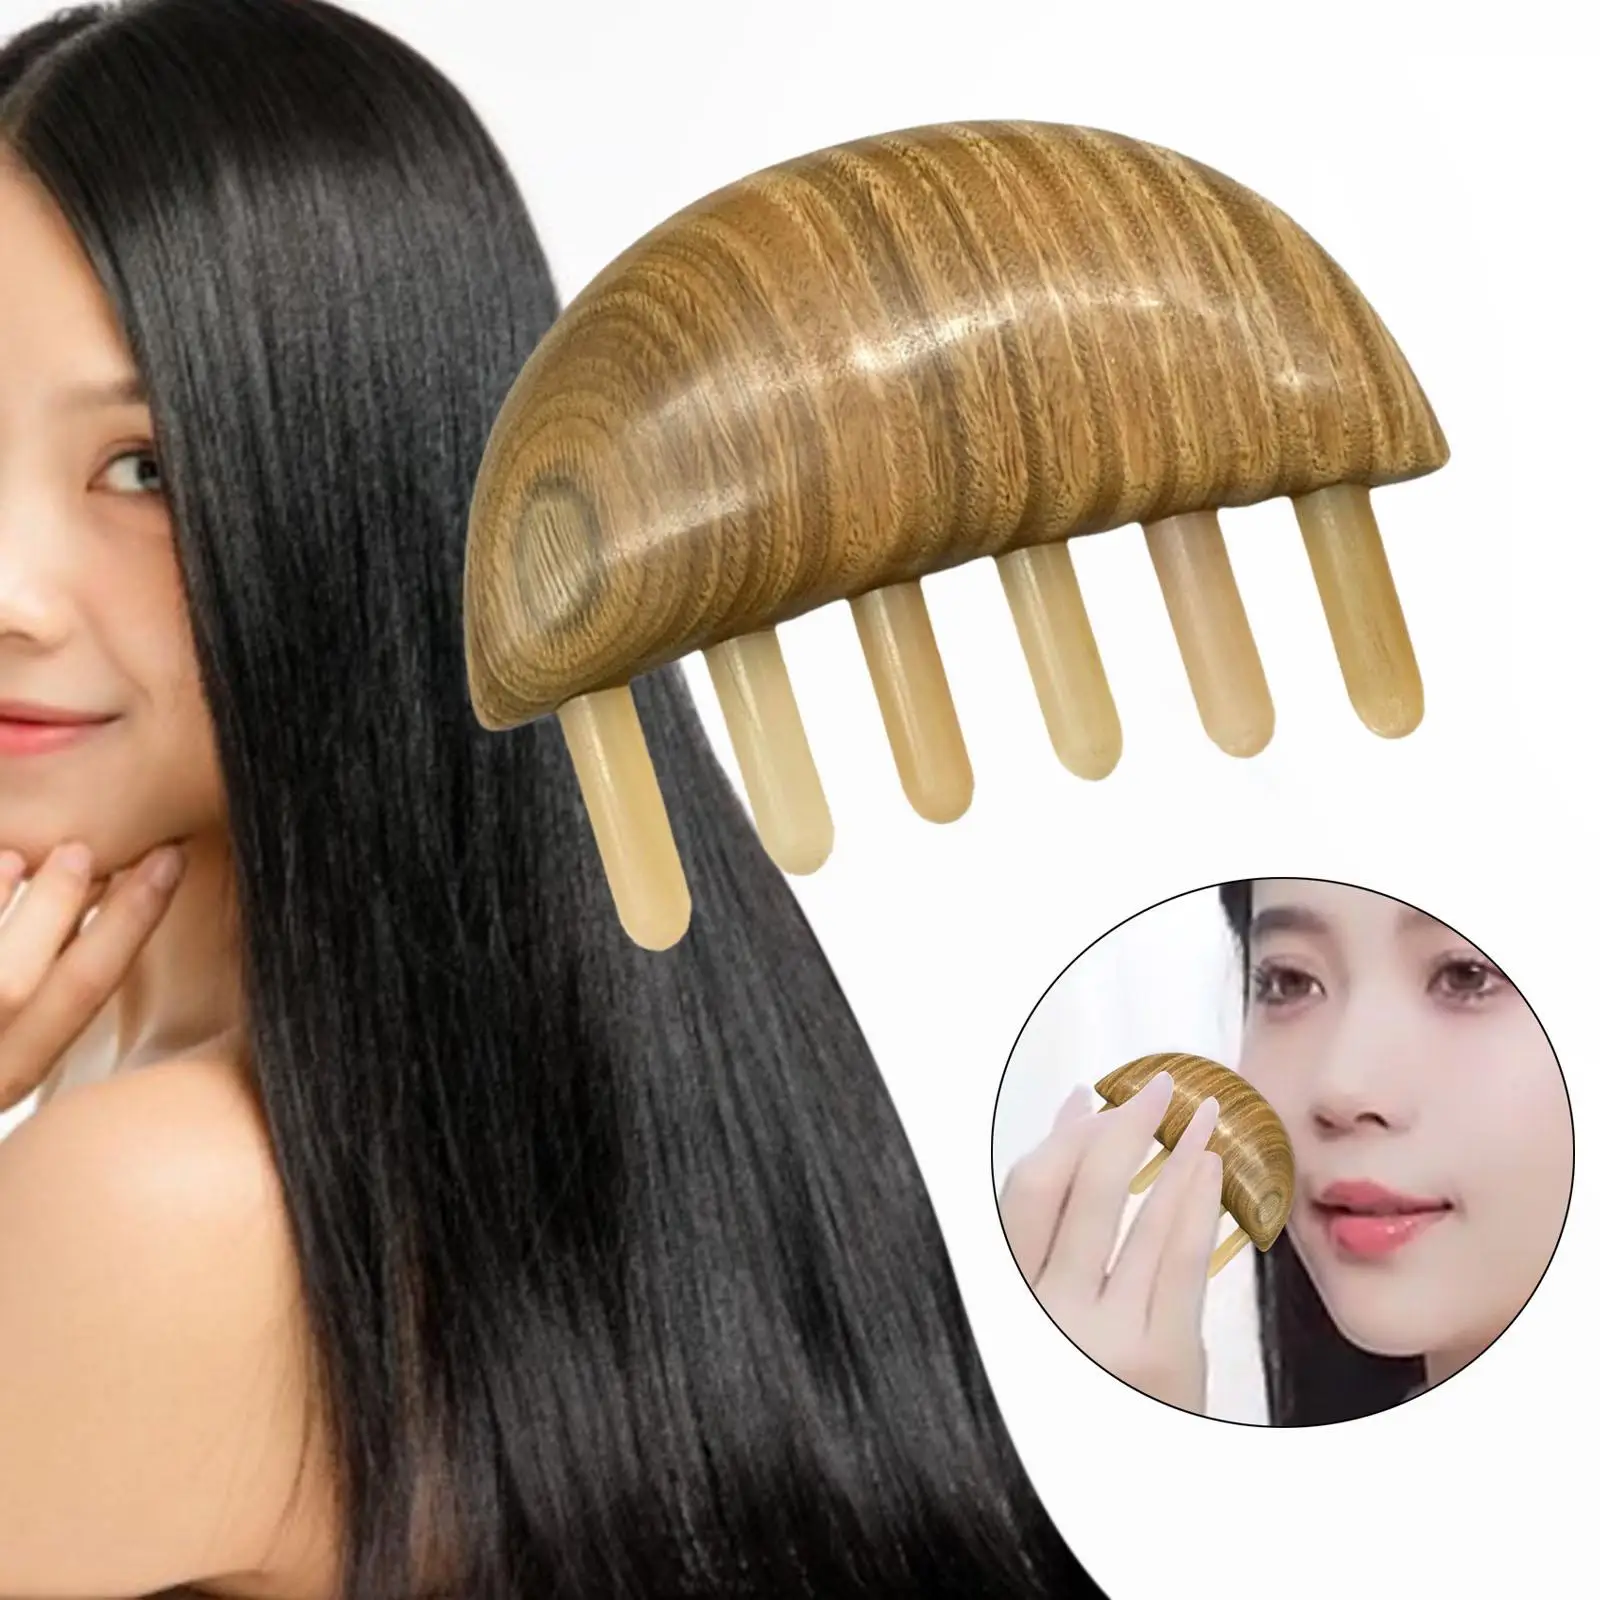 Green Sandalwood Large Teeth Hair Comb with Massage Back 10.5x7.5x2.5cm Portable